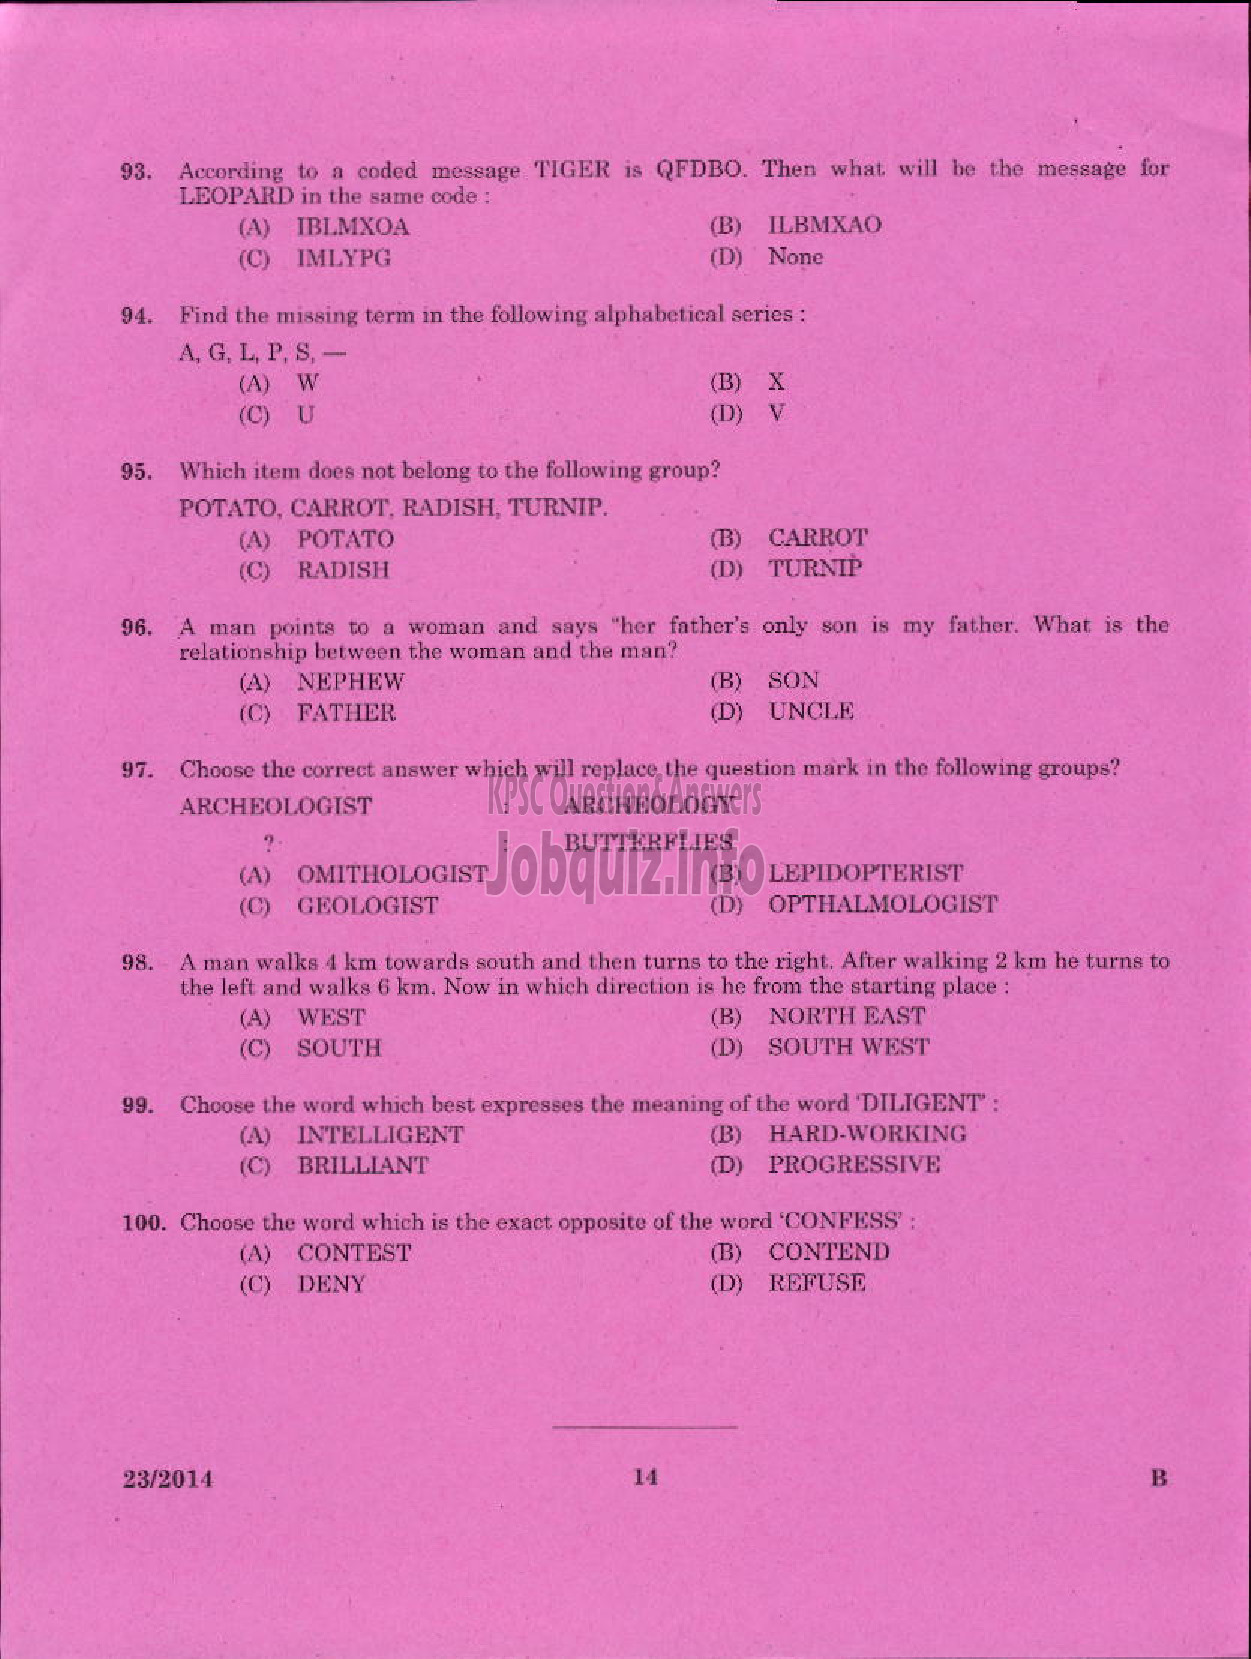 Kerala PSC Question Paper - EXCISE GUARD/WOMAN GUARD SR FOR SC/ST ONLY EXCISE PLKD TSR-12